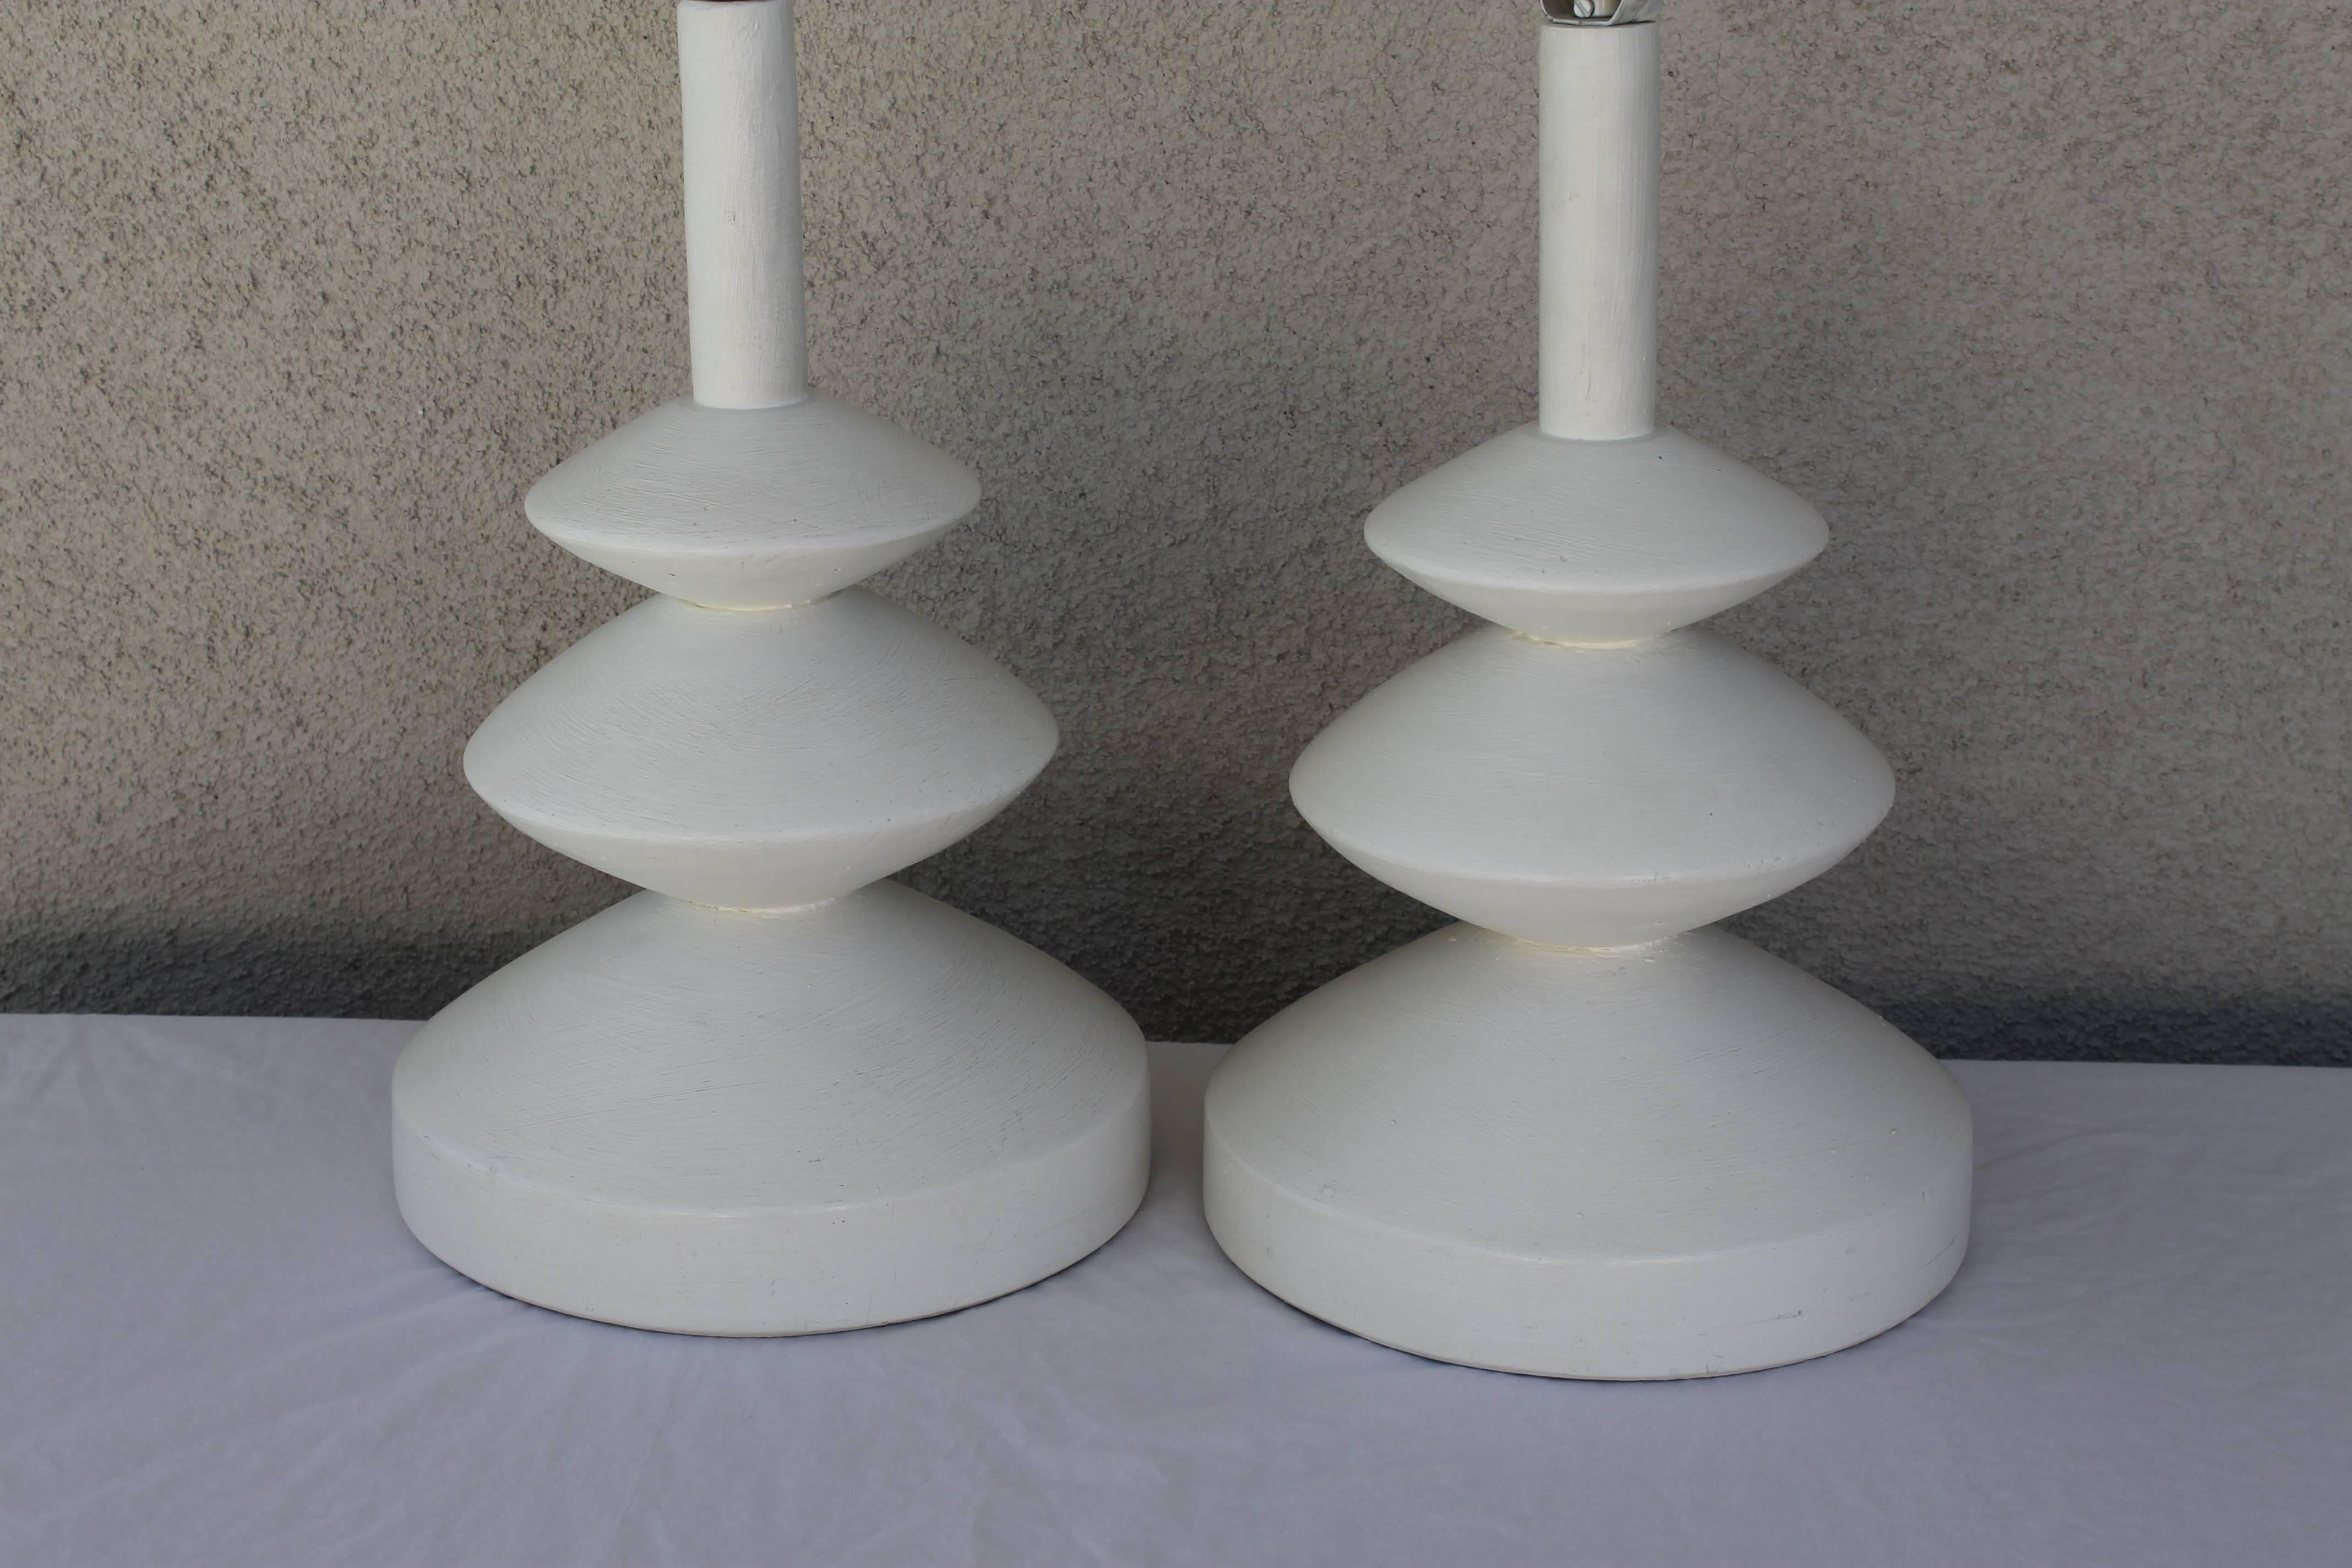 Pair of lamps attributed to Jacques Grange for Sirmos. Plaster portion is 9.25